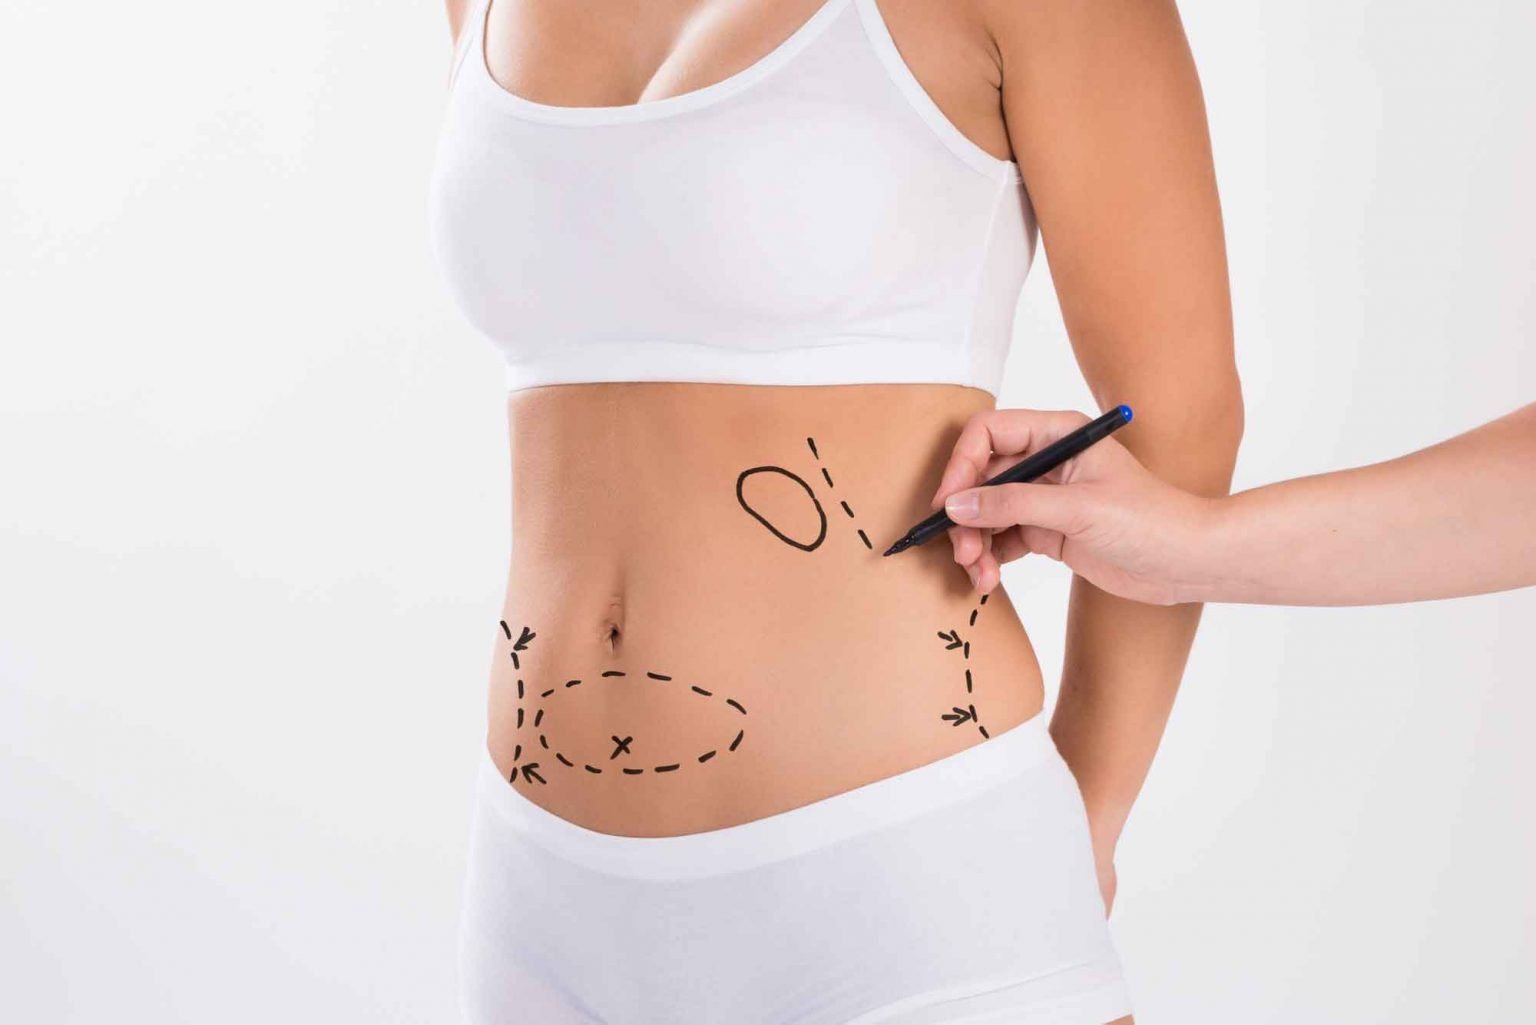 How much does liposuction of the abdomen cost?